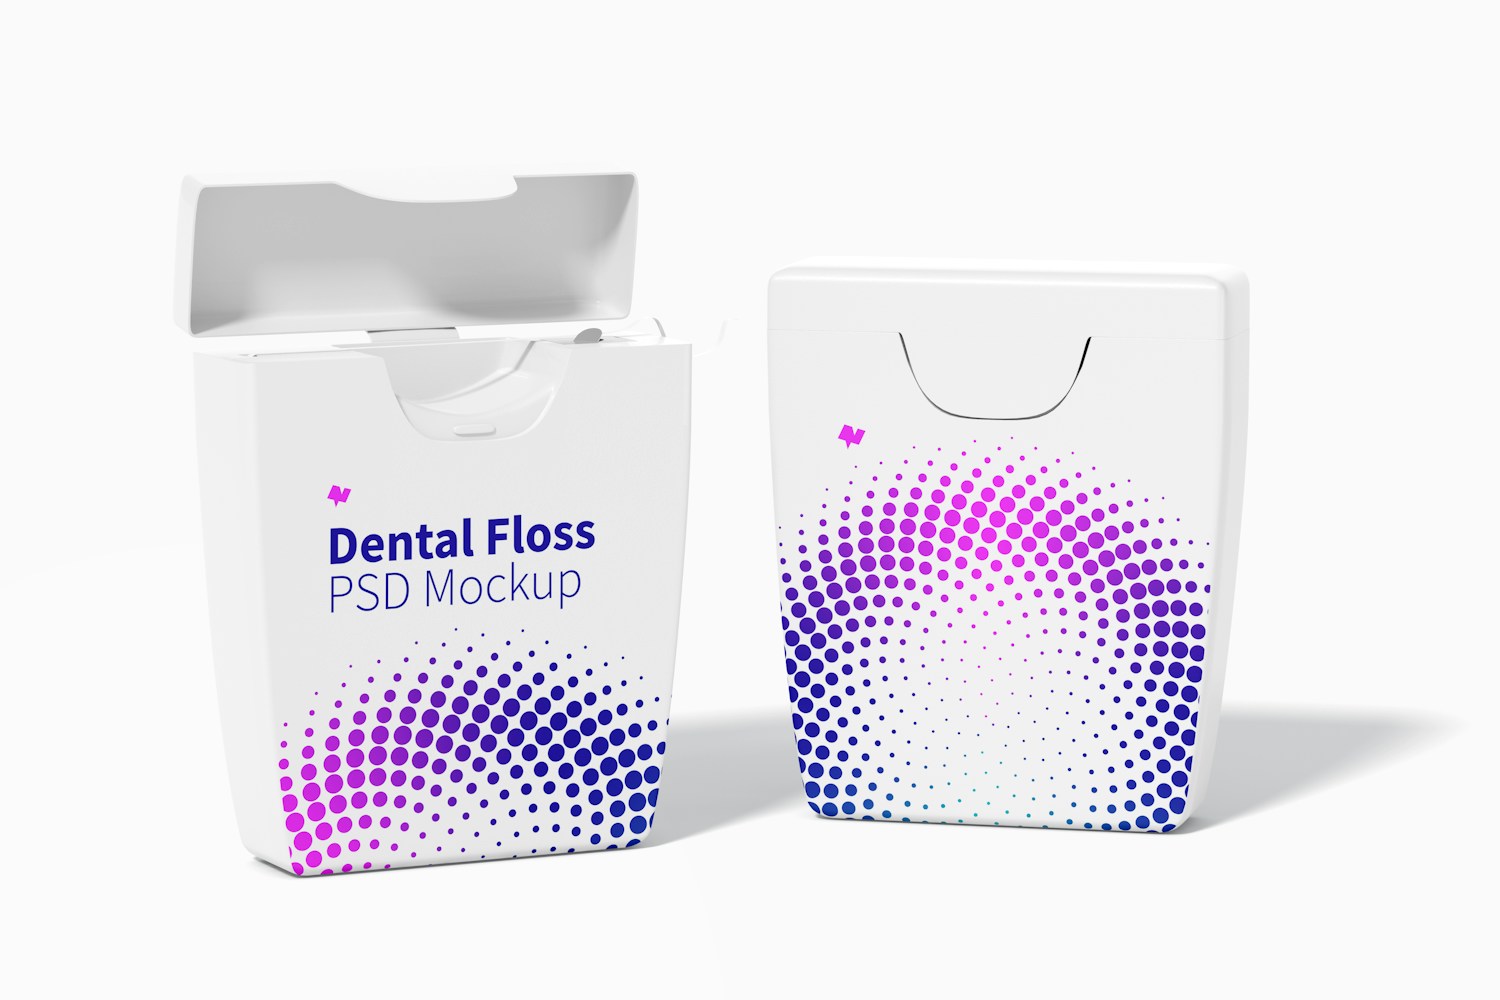 Dental Flosses Mockup, Opened and Closed